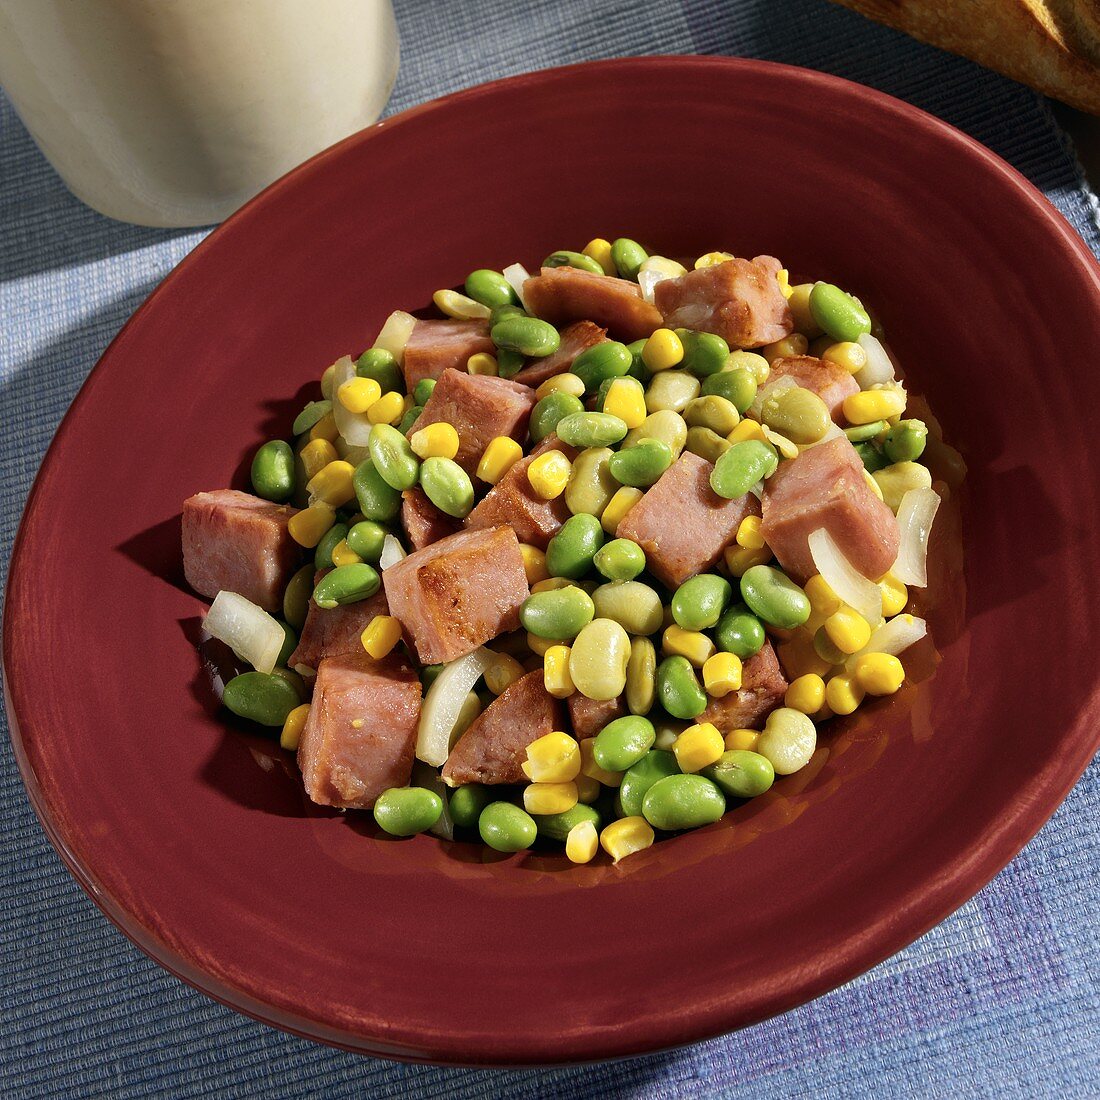 Skillet Casserole with Ham, Edamame, Lima Beans and Corn in a Bowl